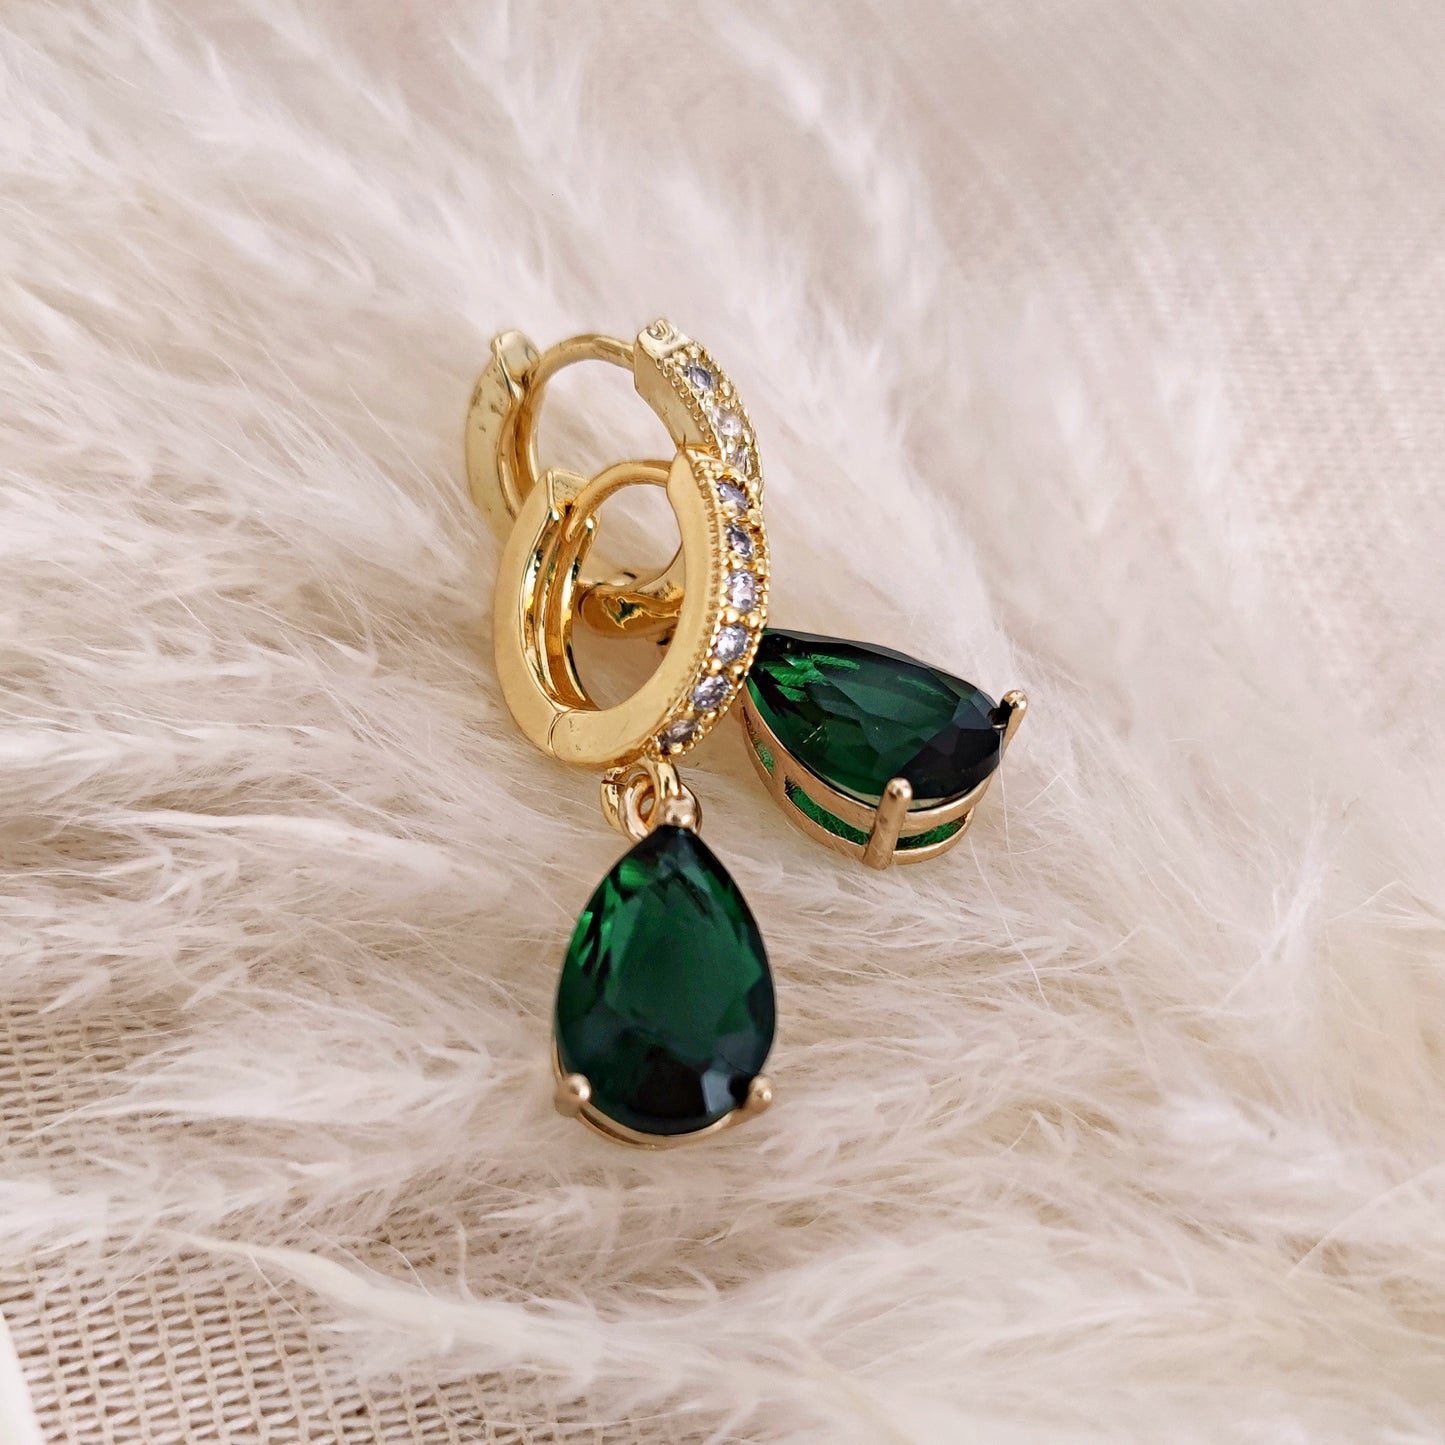 Golden Huggie Hoops with Emerald Green Drops // FOREST